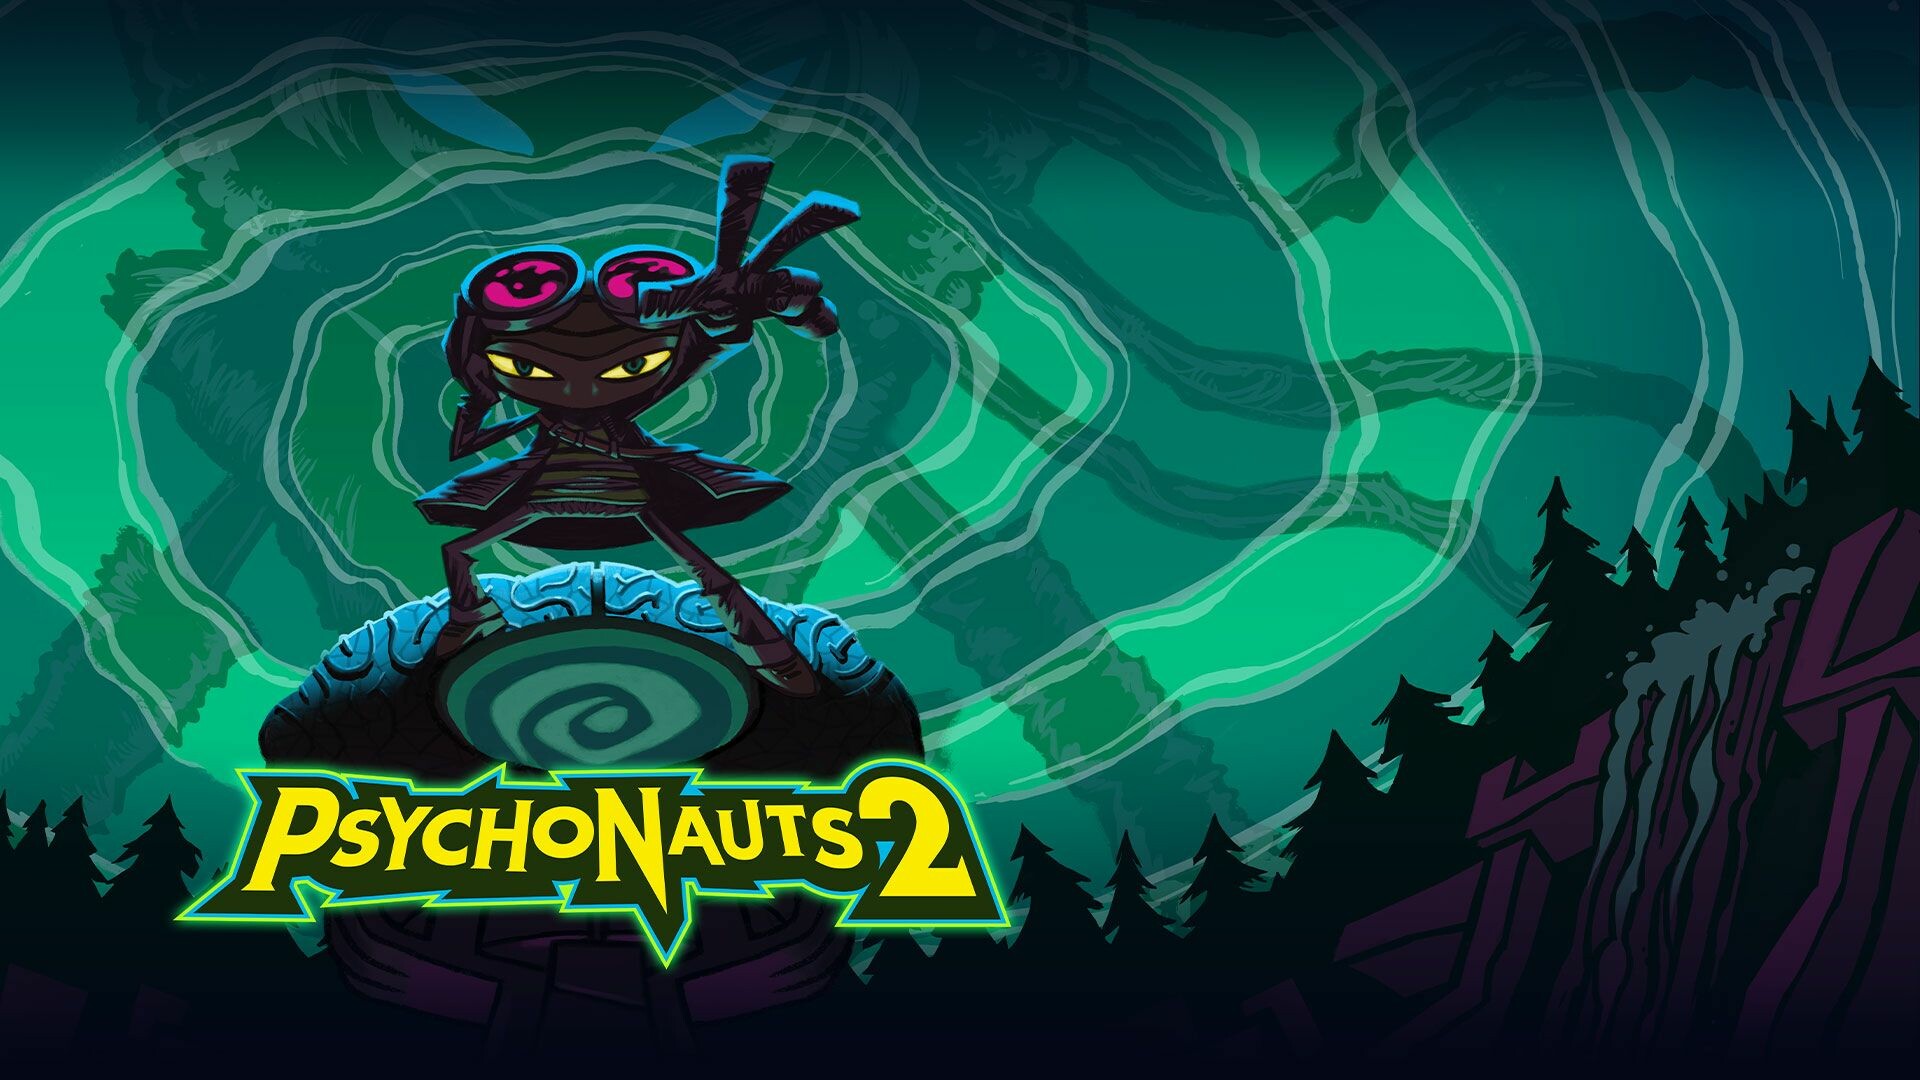 Psychonauts 2: A platform-adventure game with cinematic style, Published by Xbox Game Studios. 1920x1080 Full HD Background.